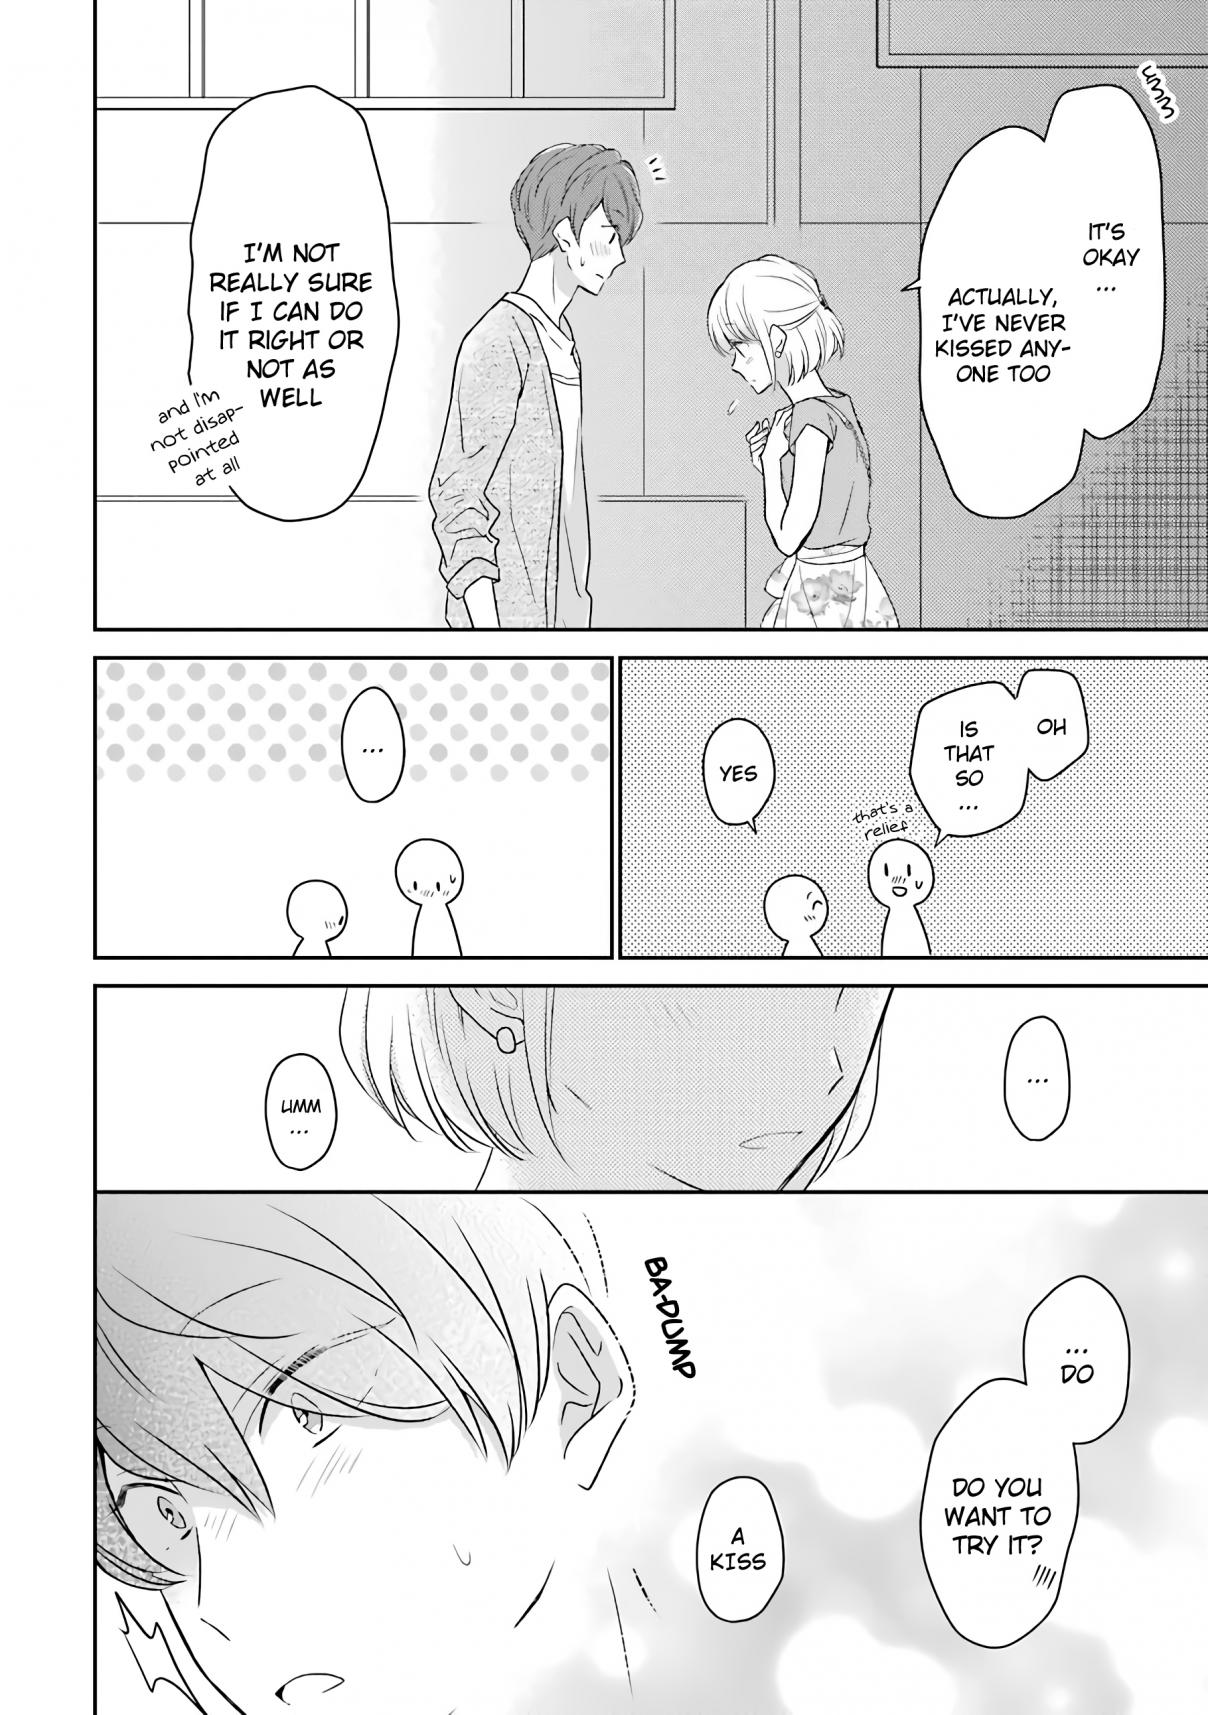 I'm Nearly 30, But This Is My First Love Vol. 2 Ch. 20